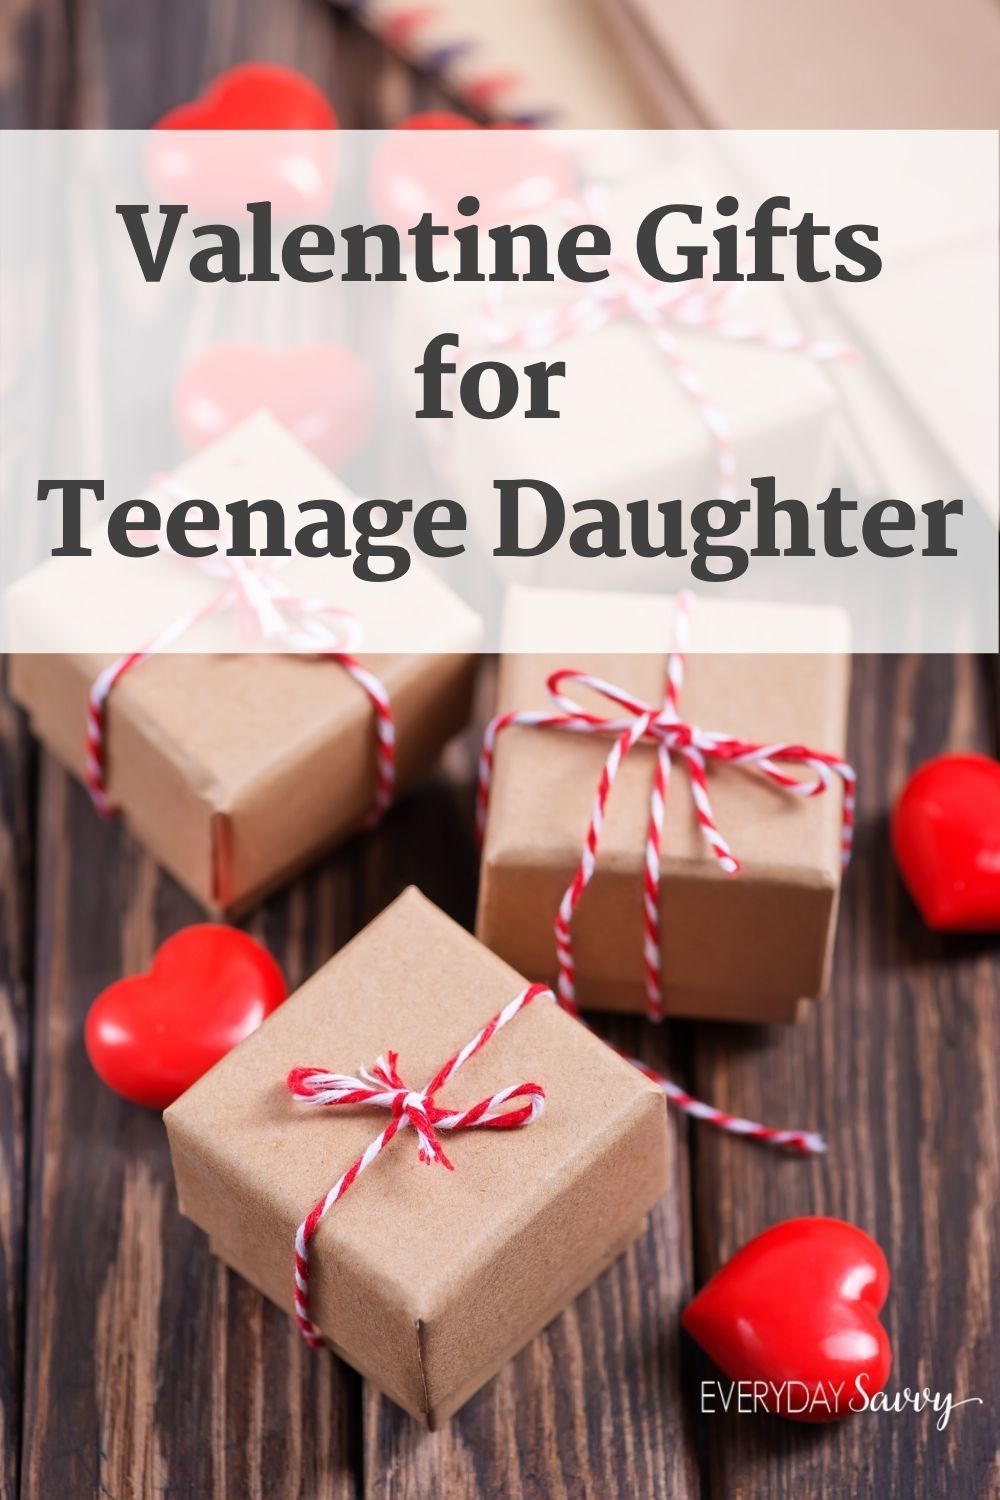 Valentine Gift Ideas For Teenage Daughter
 Valentine s Day Gifts for Teenage Daughter Everyday Savvy